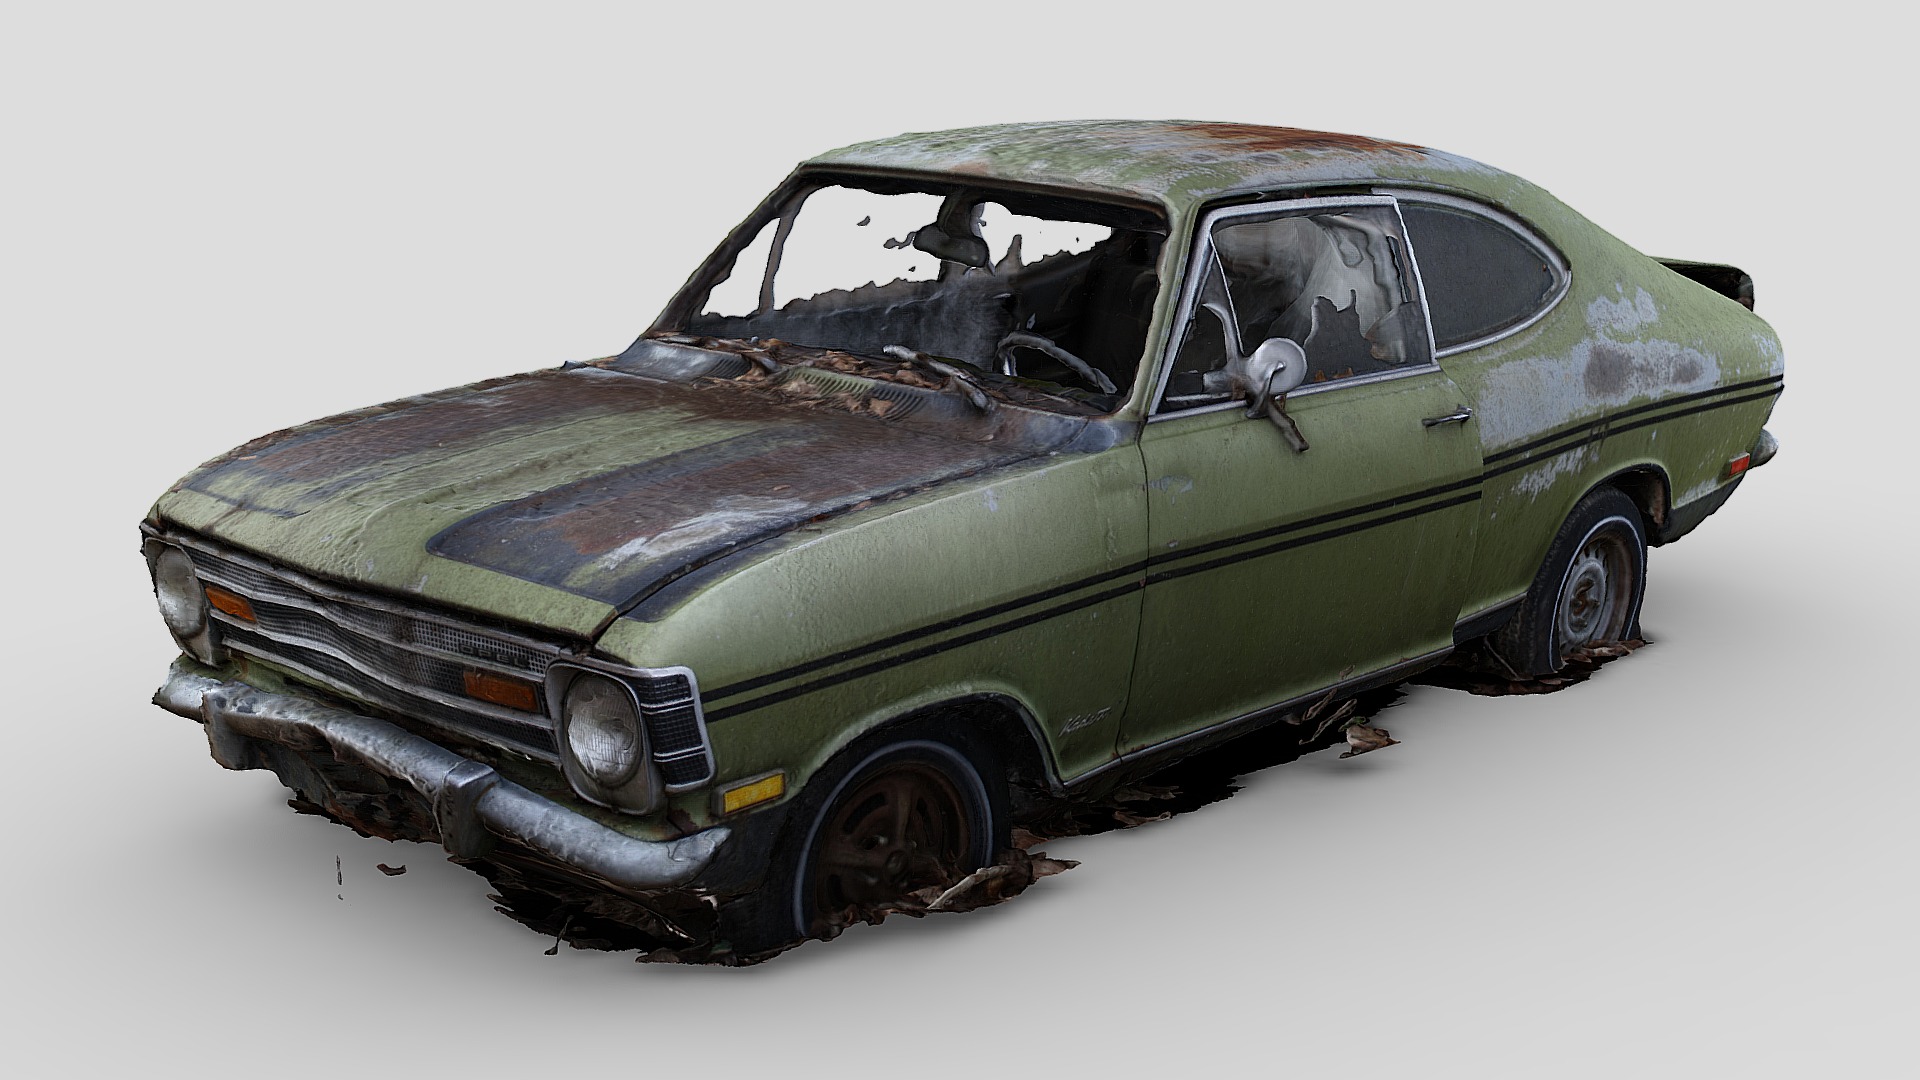 3D model Abandoned Opel Kadett (Raw Scan) - This is a 3D model of the Abandoned Opel Kadett (Raw Scan). The 3D model is about a green car with a door open.